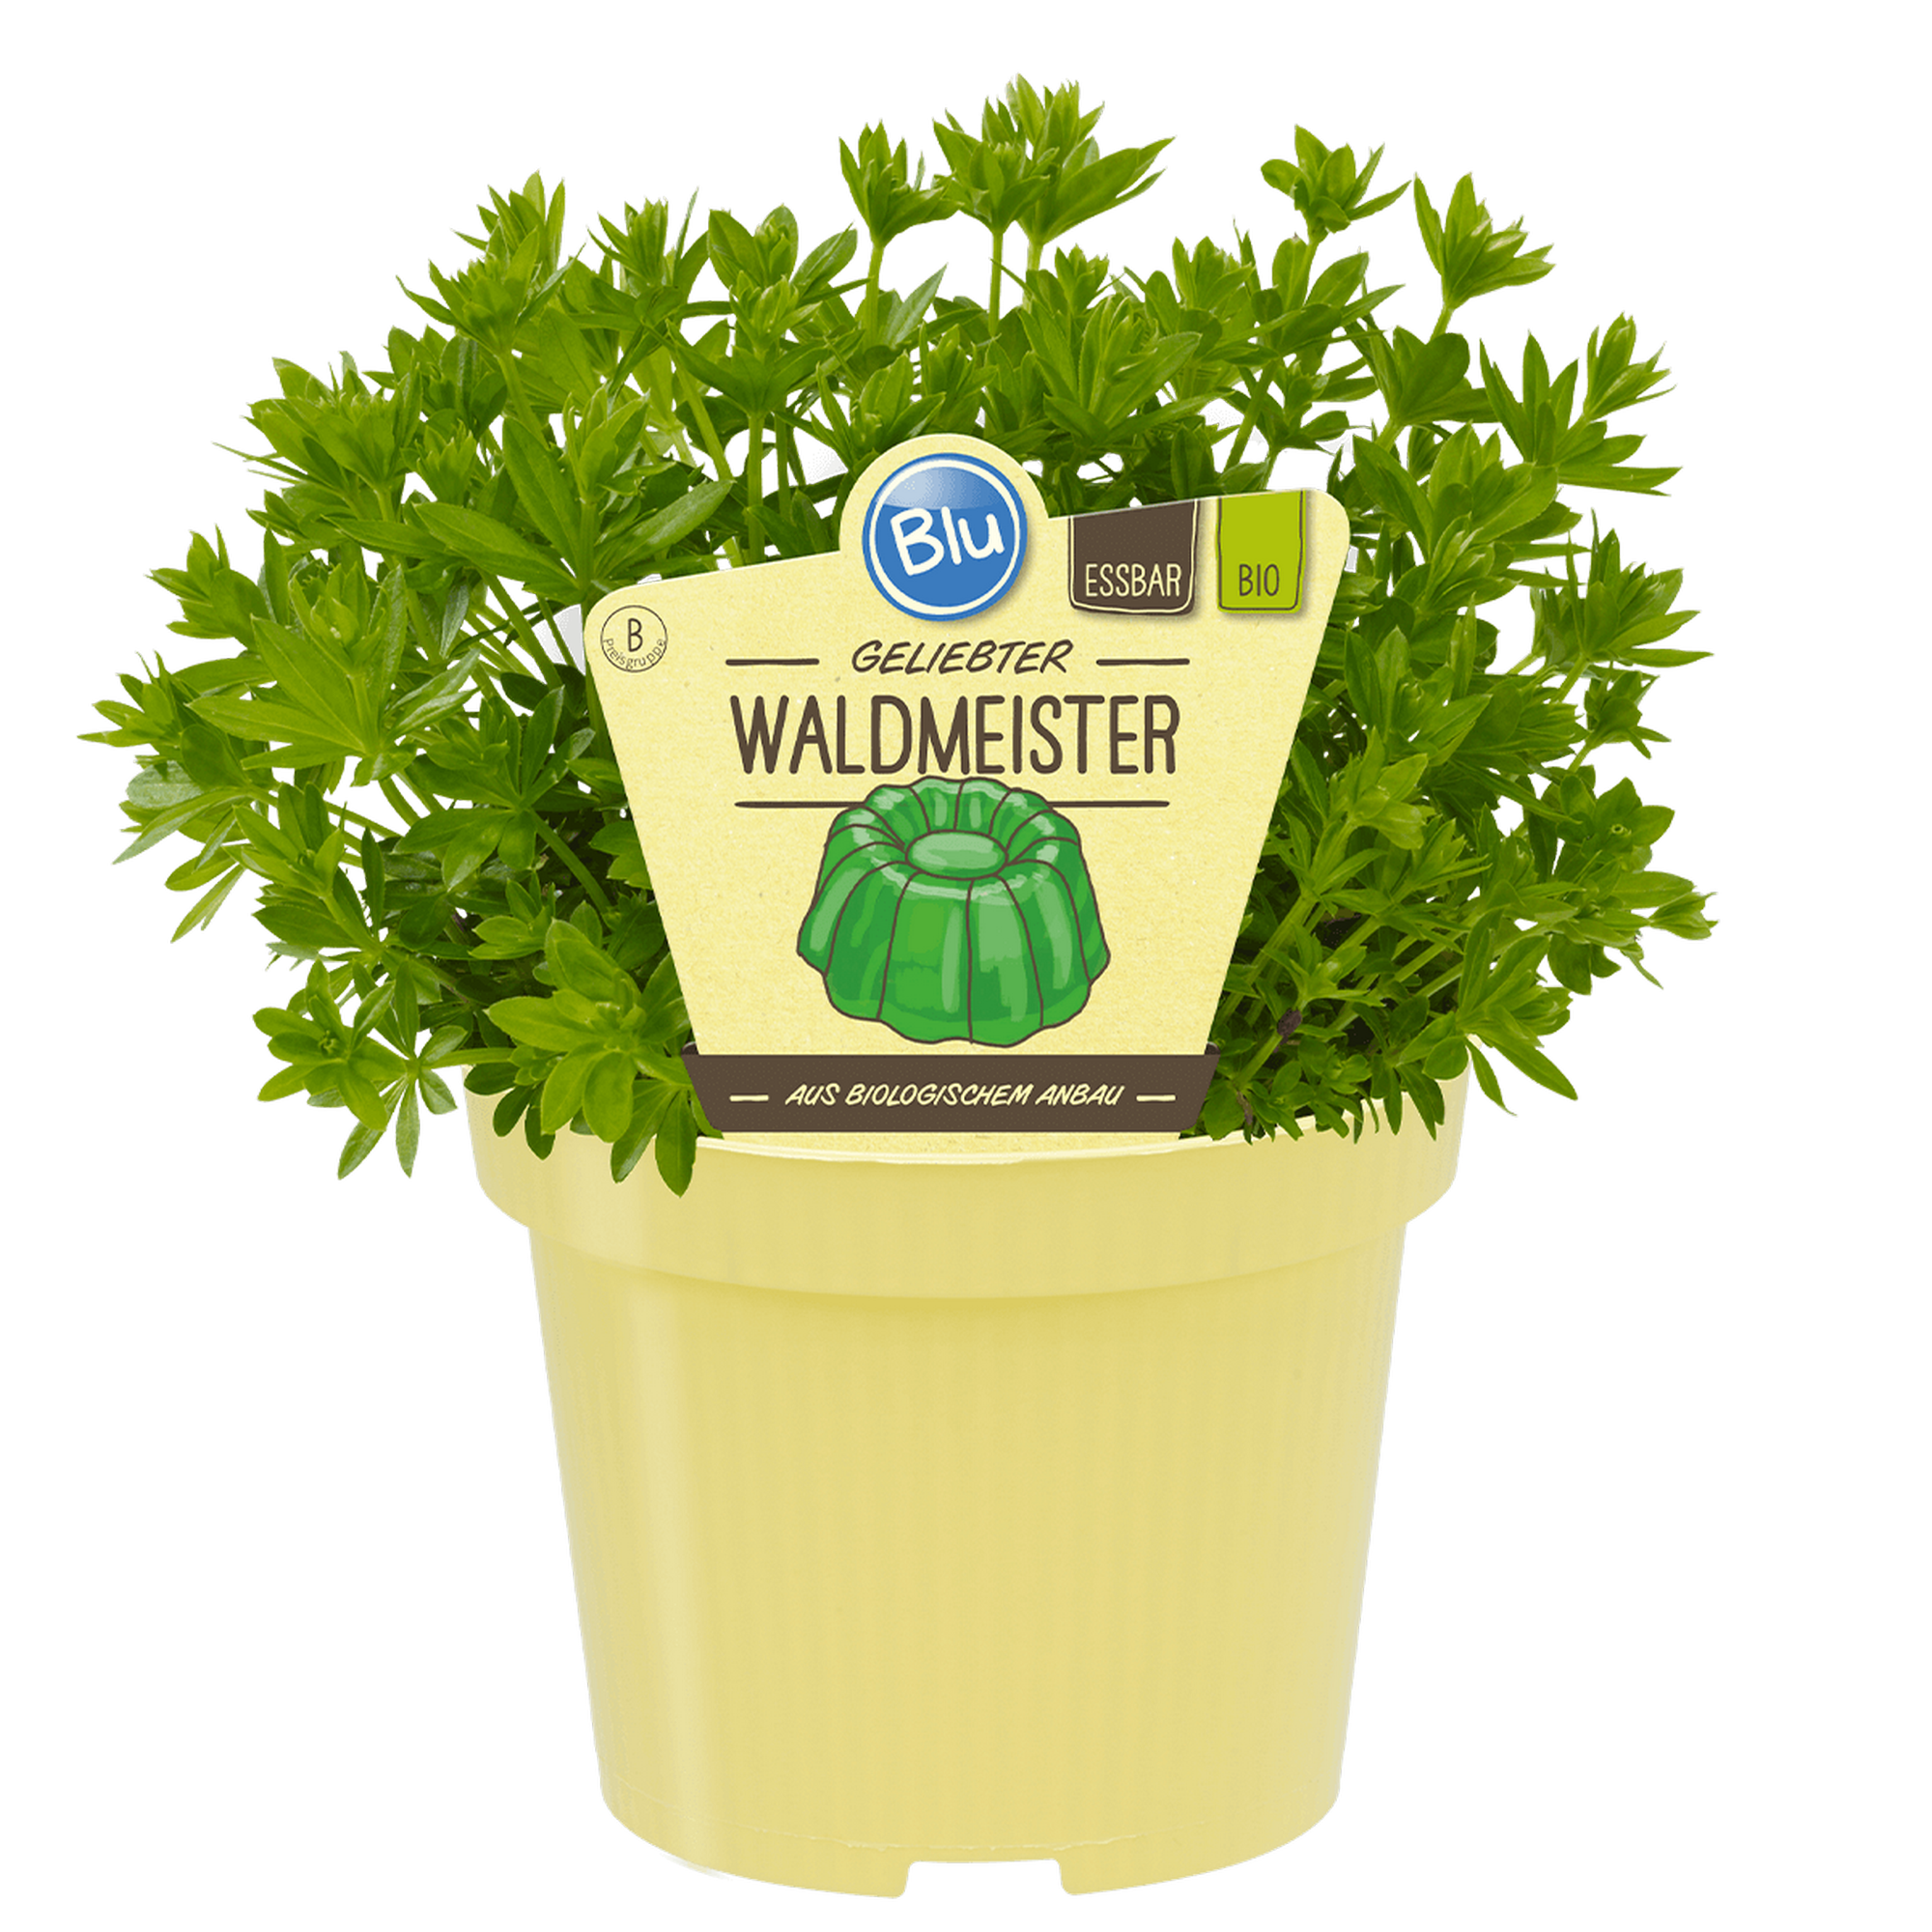 Bio-Waldmeister 12 cm Topf + product picture